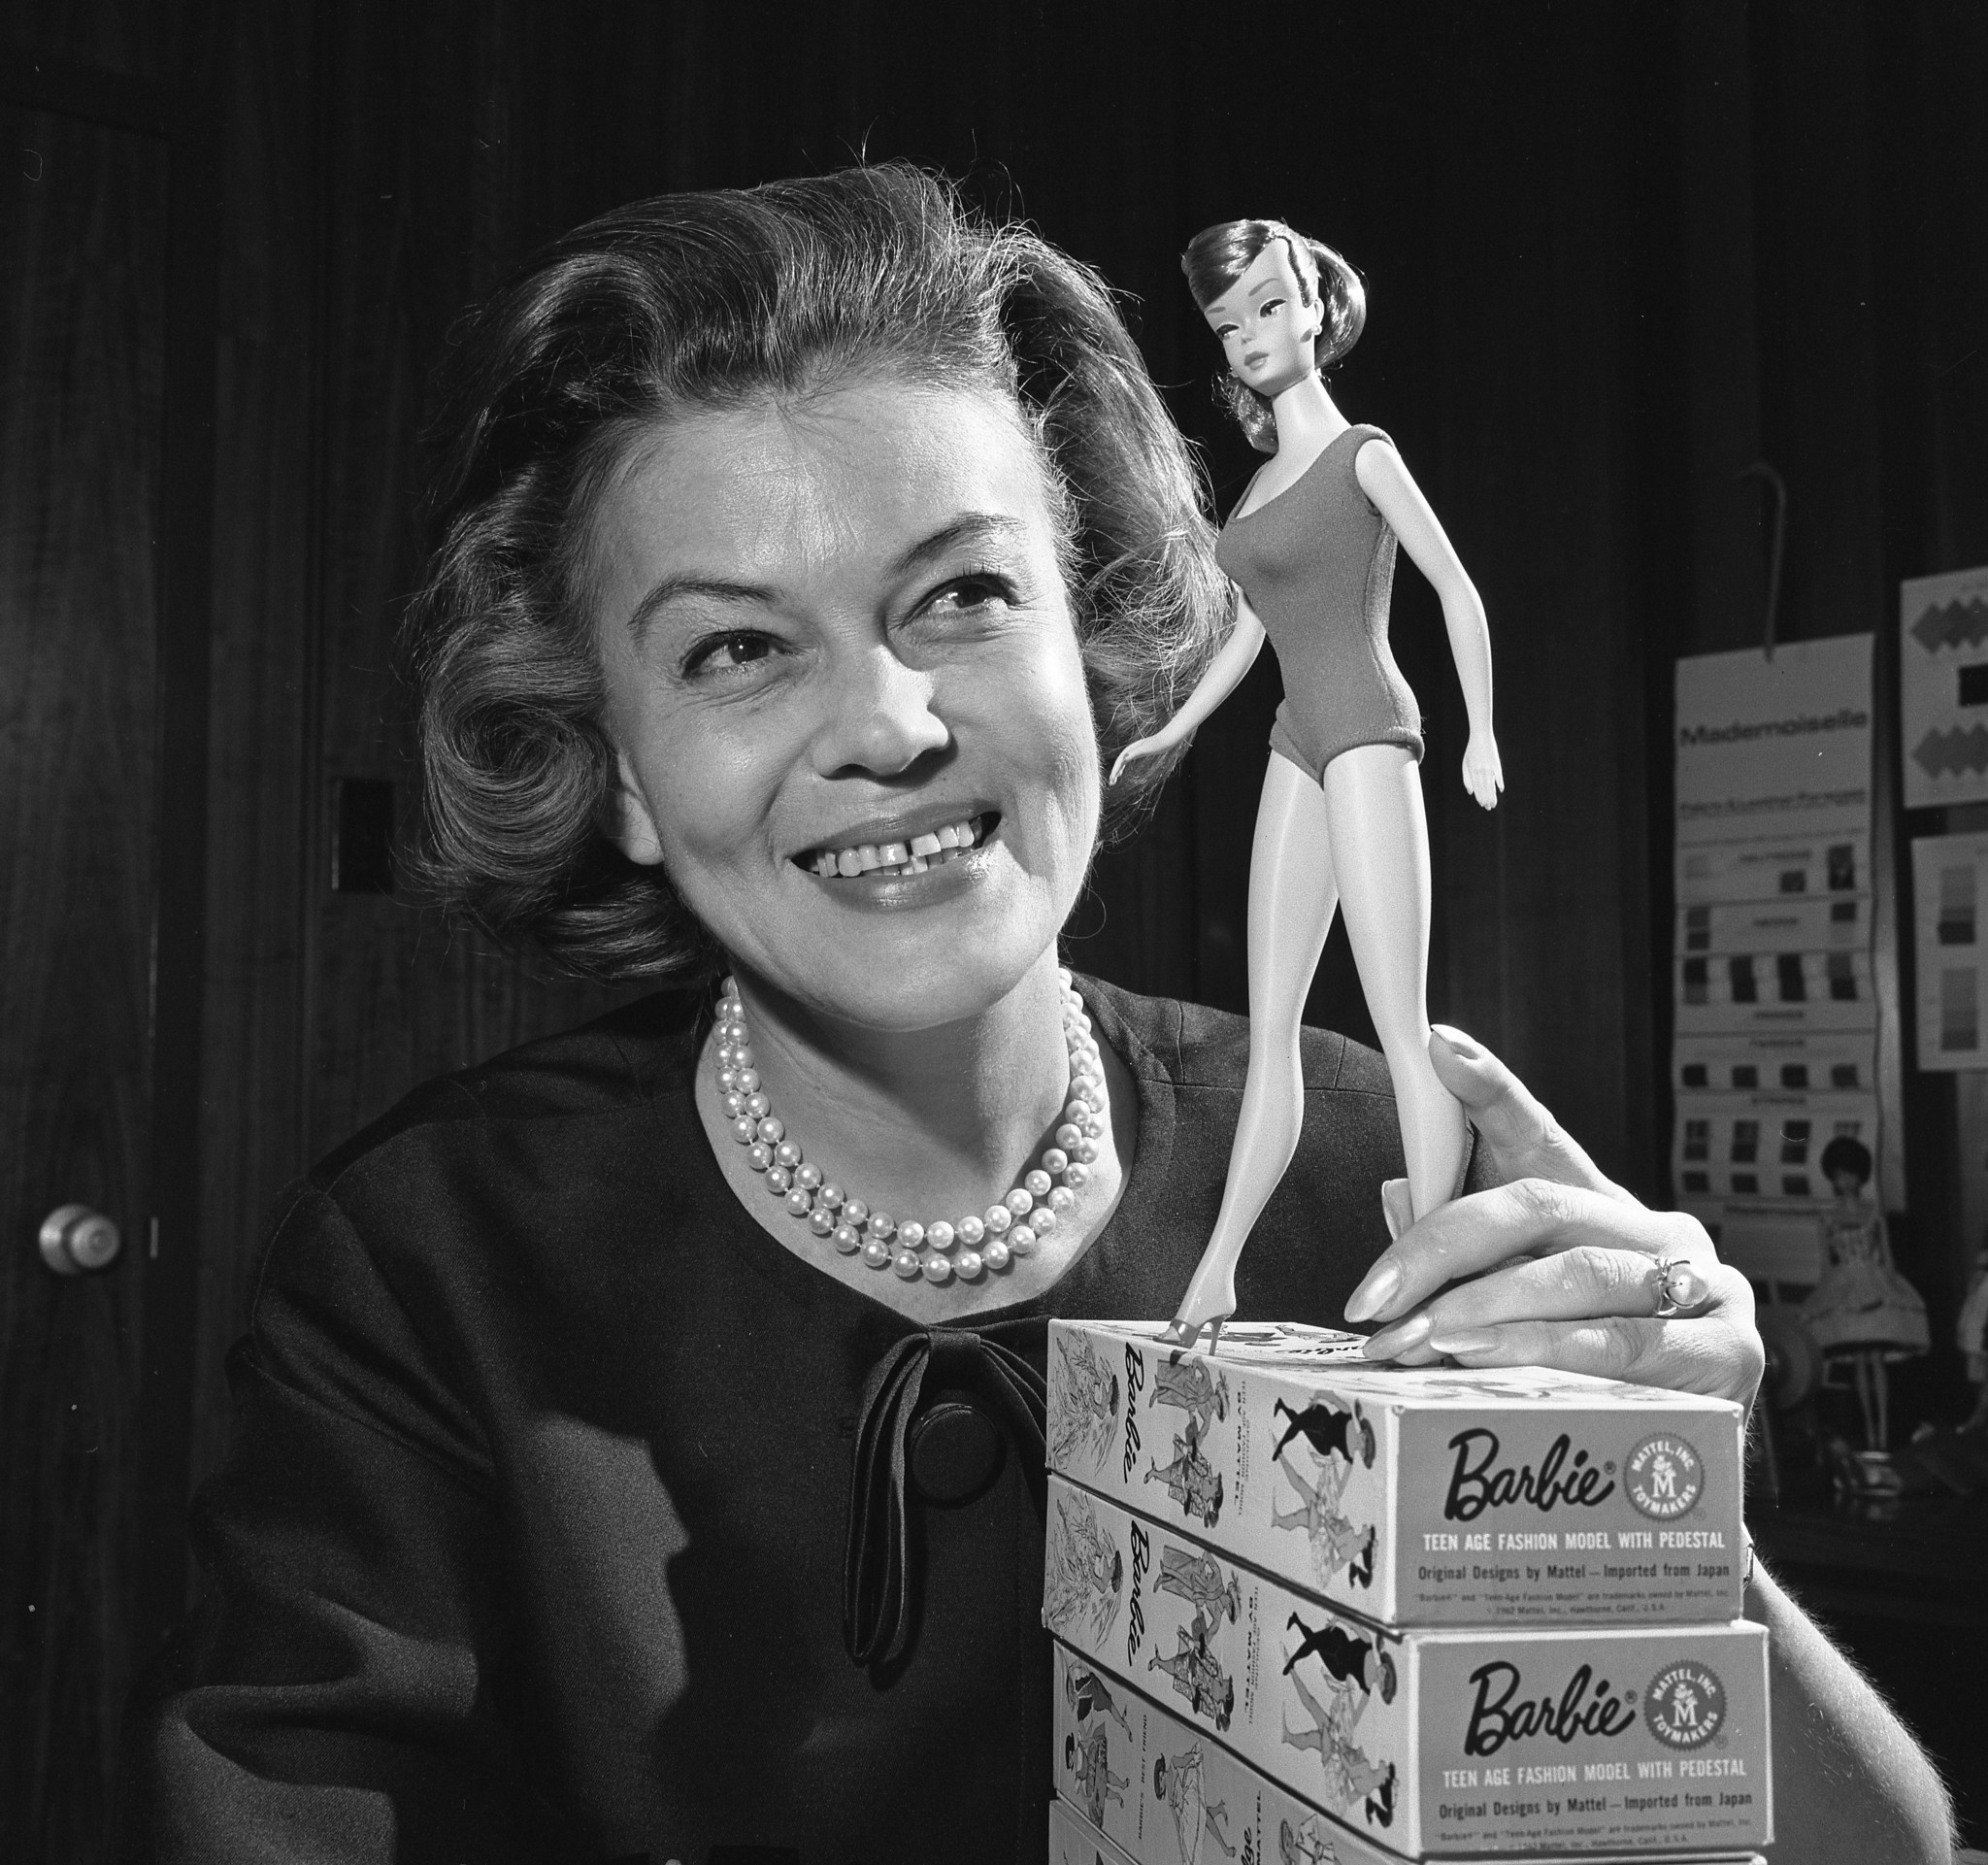 Charlotte Johnson, director of fashion for the highly successful Barbie doll, who is photographed here with a doll in 1964, works in a world of one-sixth scale clothing.